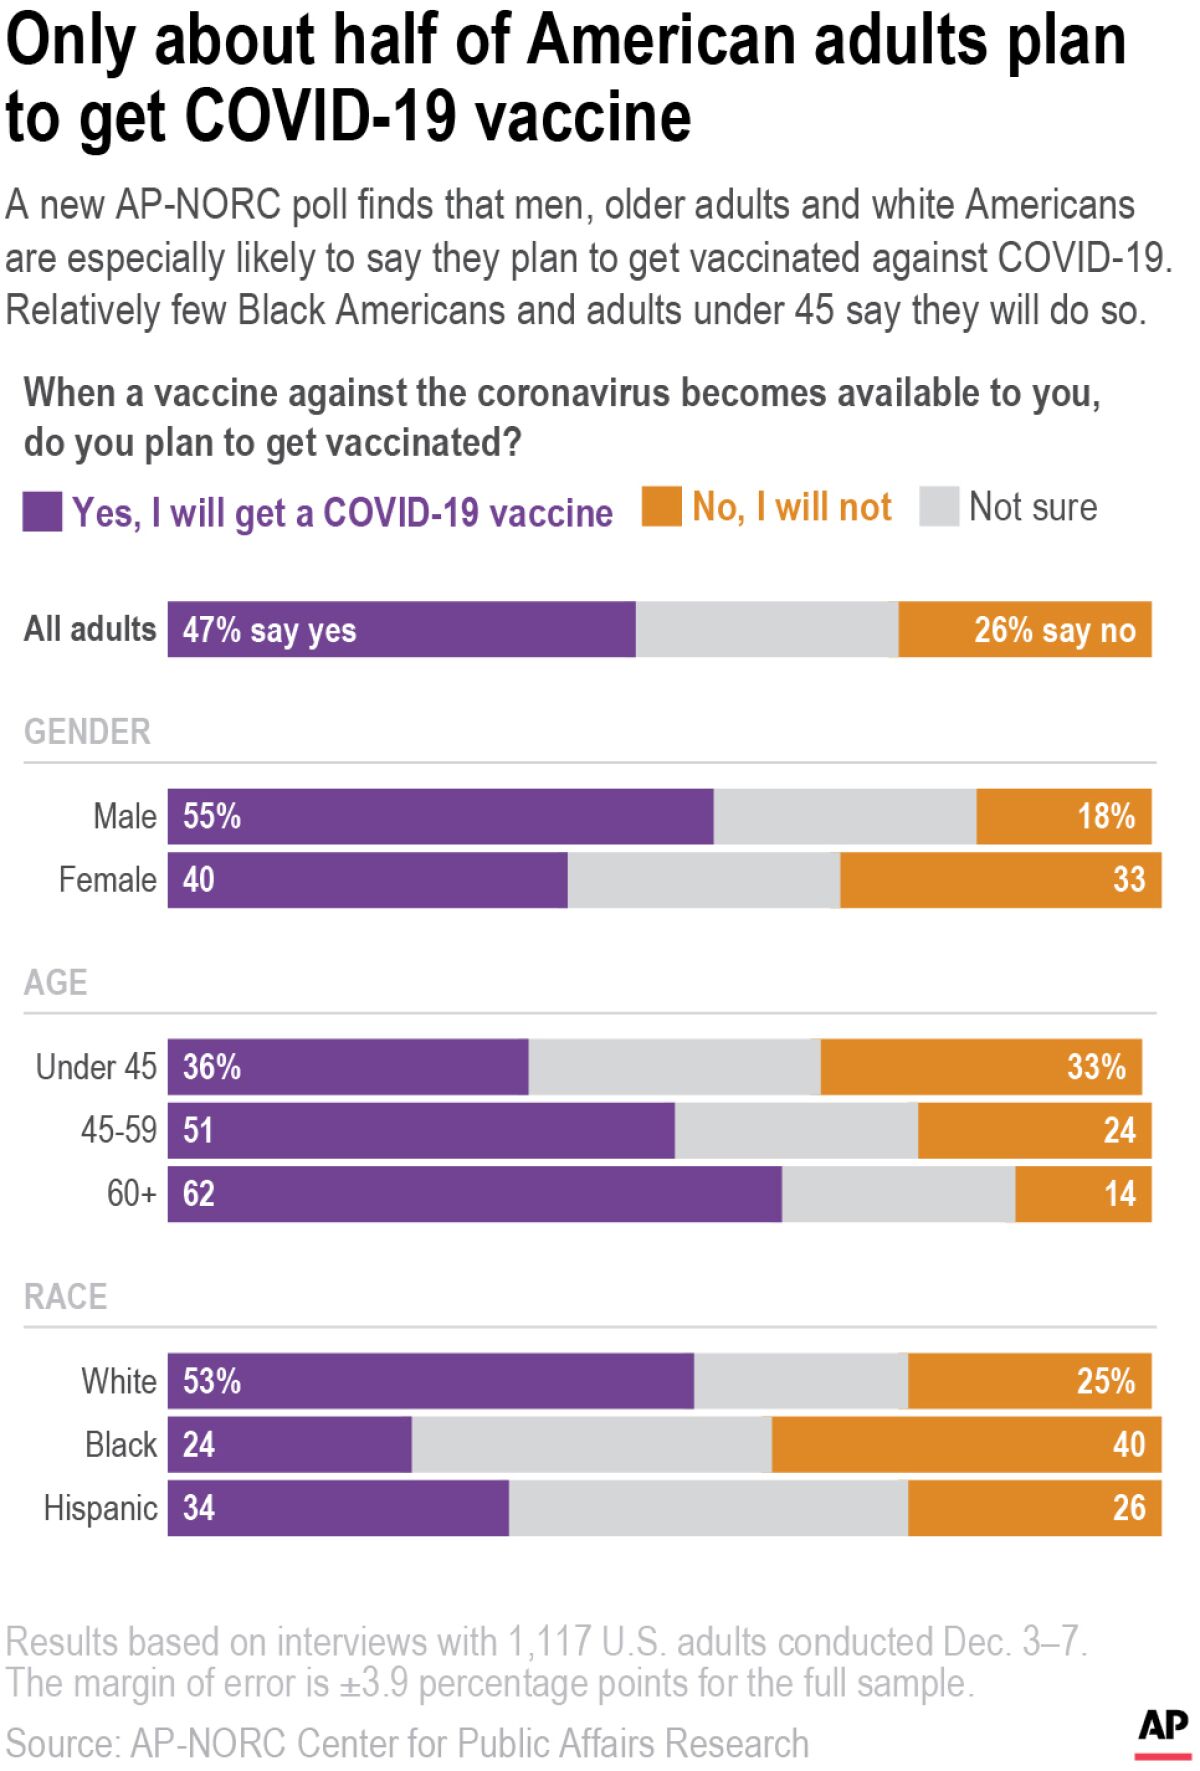 Older adults and white Americans are especially likely to say they plan to get vaccinated against COVID-19. 